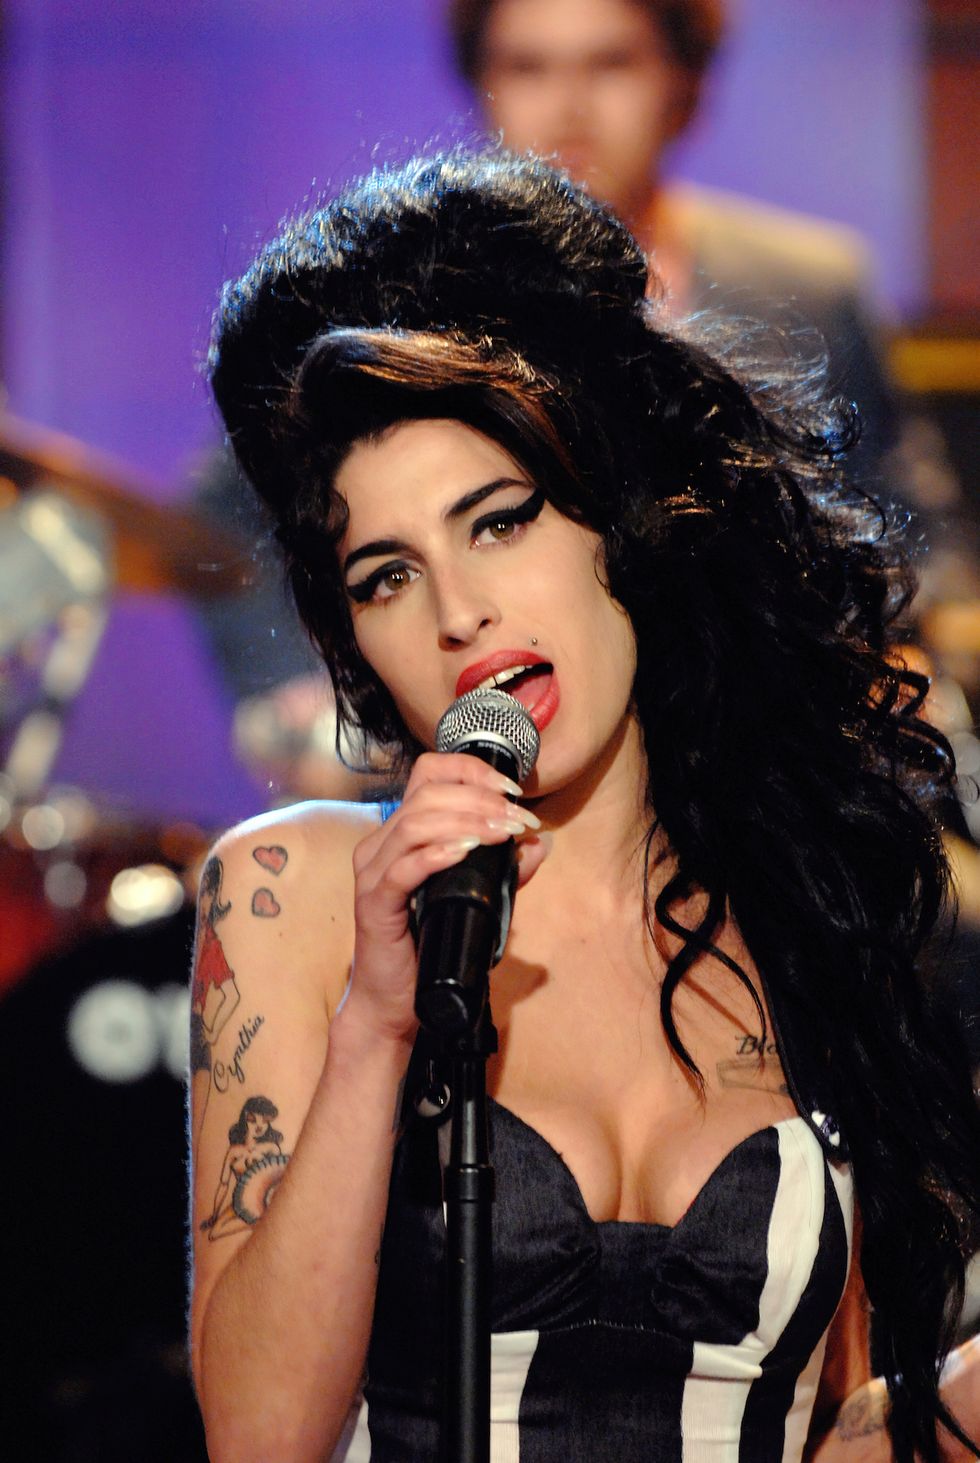 back to black is director sam taylor johnson’s biopic about amy winehouse, an upcoming focus features release credit dave bjerke bc courtesy everett